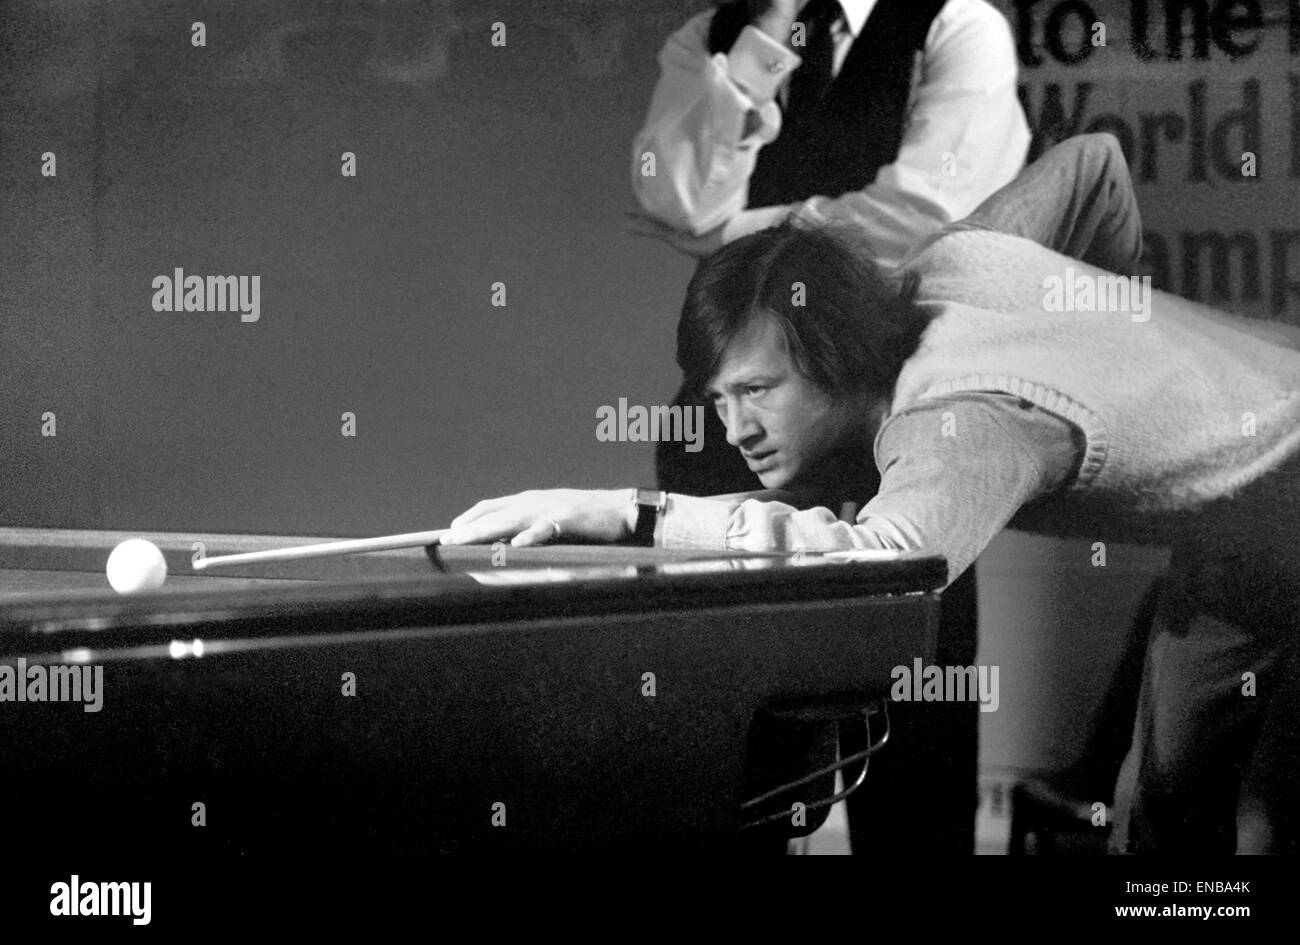 Snooker player Alex ñHurricaneî Higgins in action in the afternoon session of the Snooker championships, at Manchester City Hall